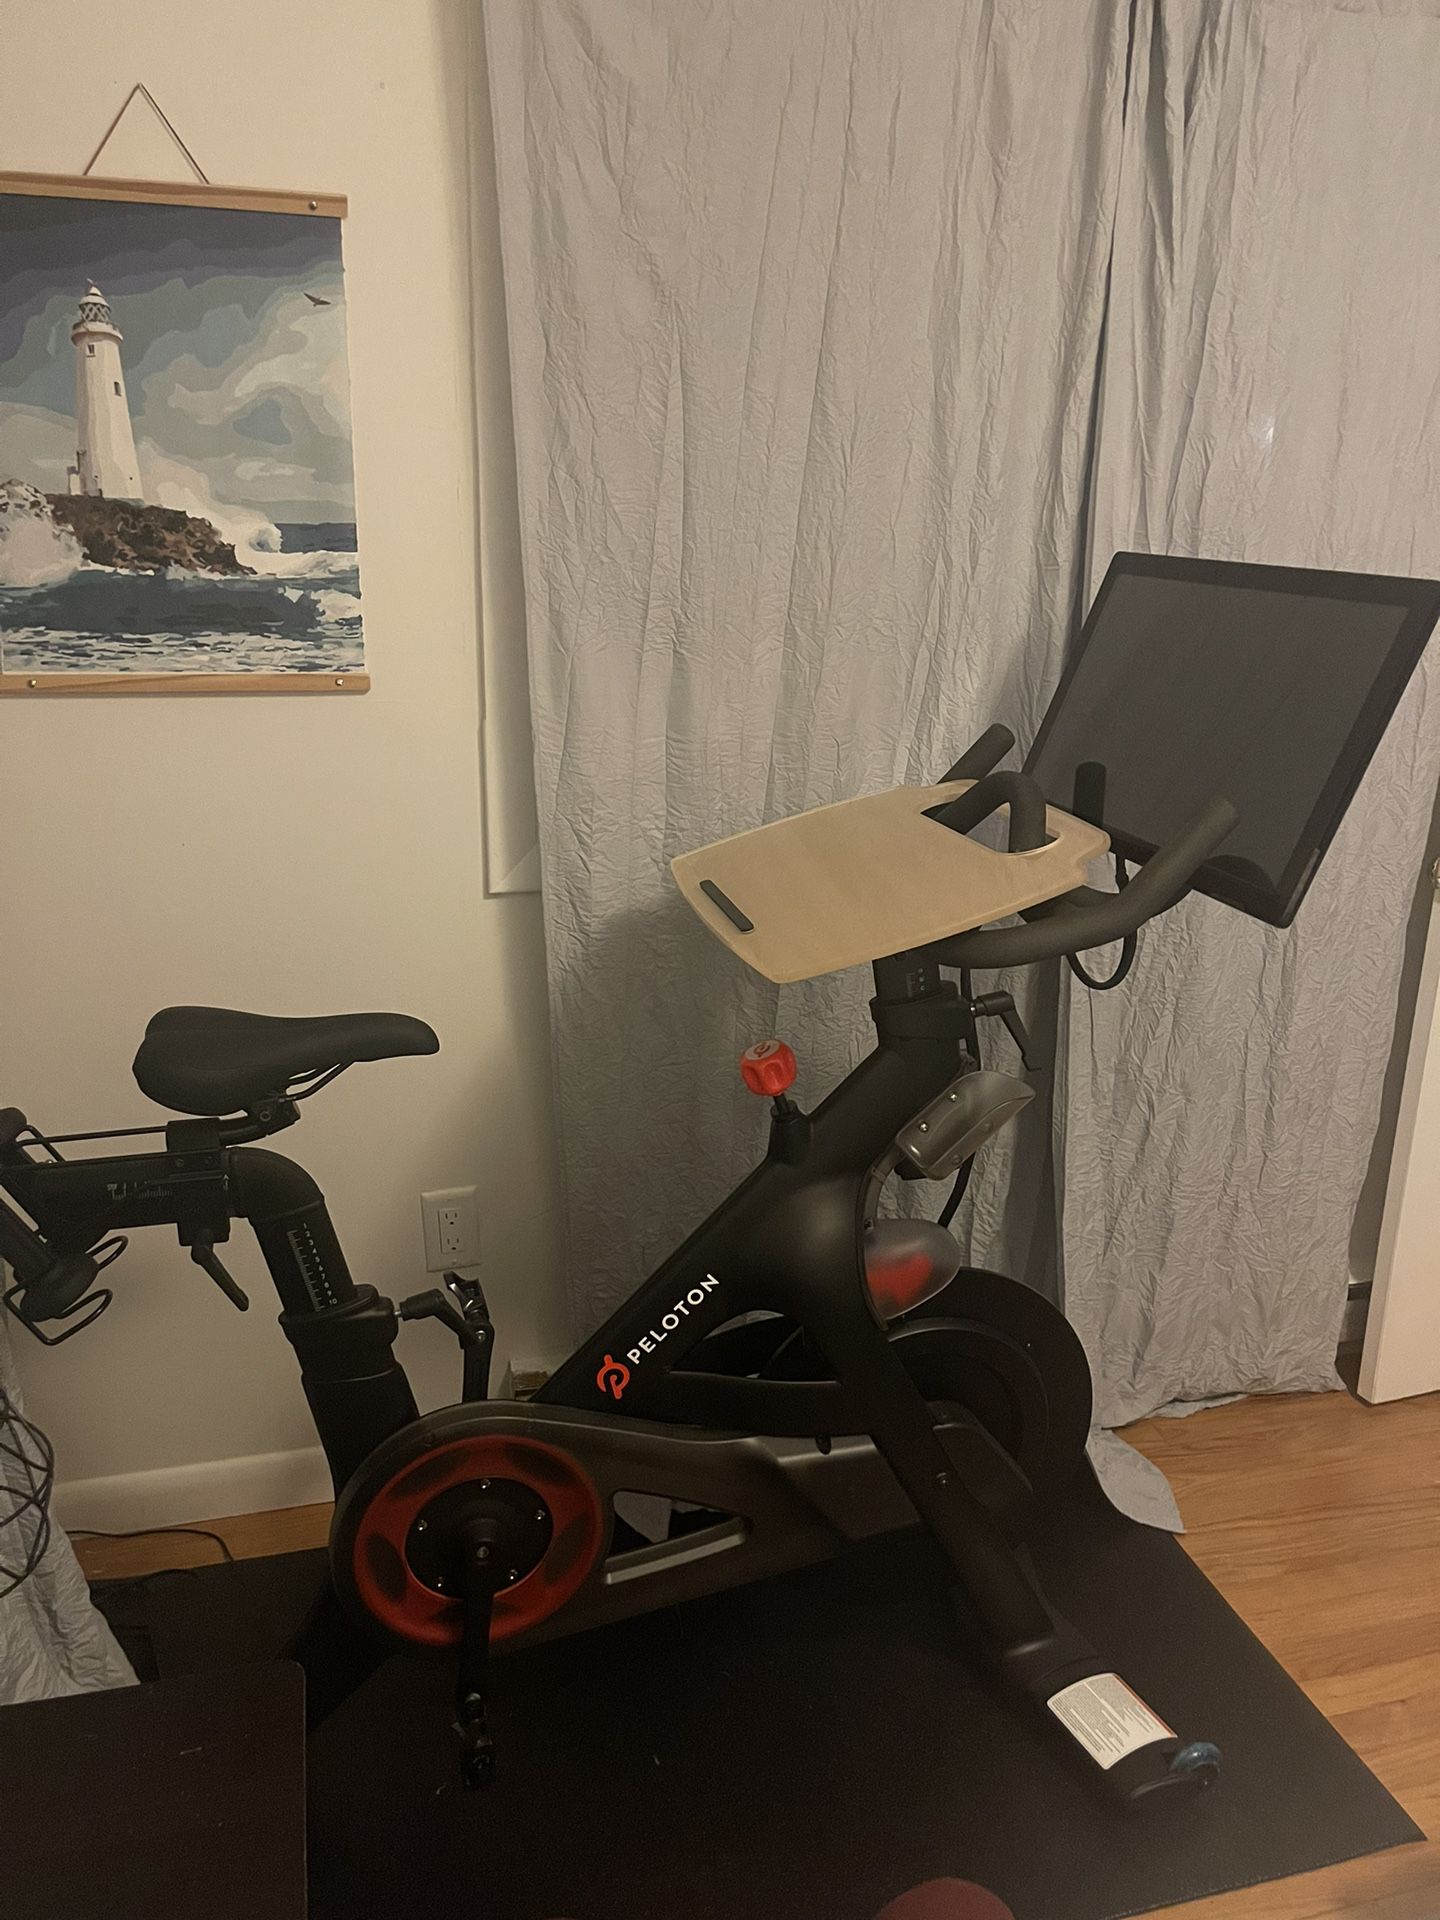 Peloton Bike, Weights, Shoes and Mat